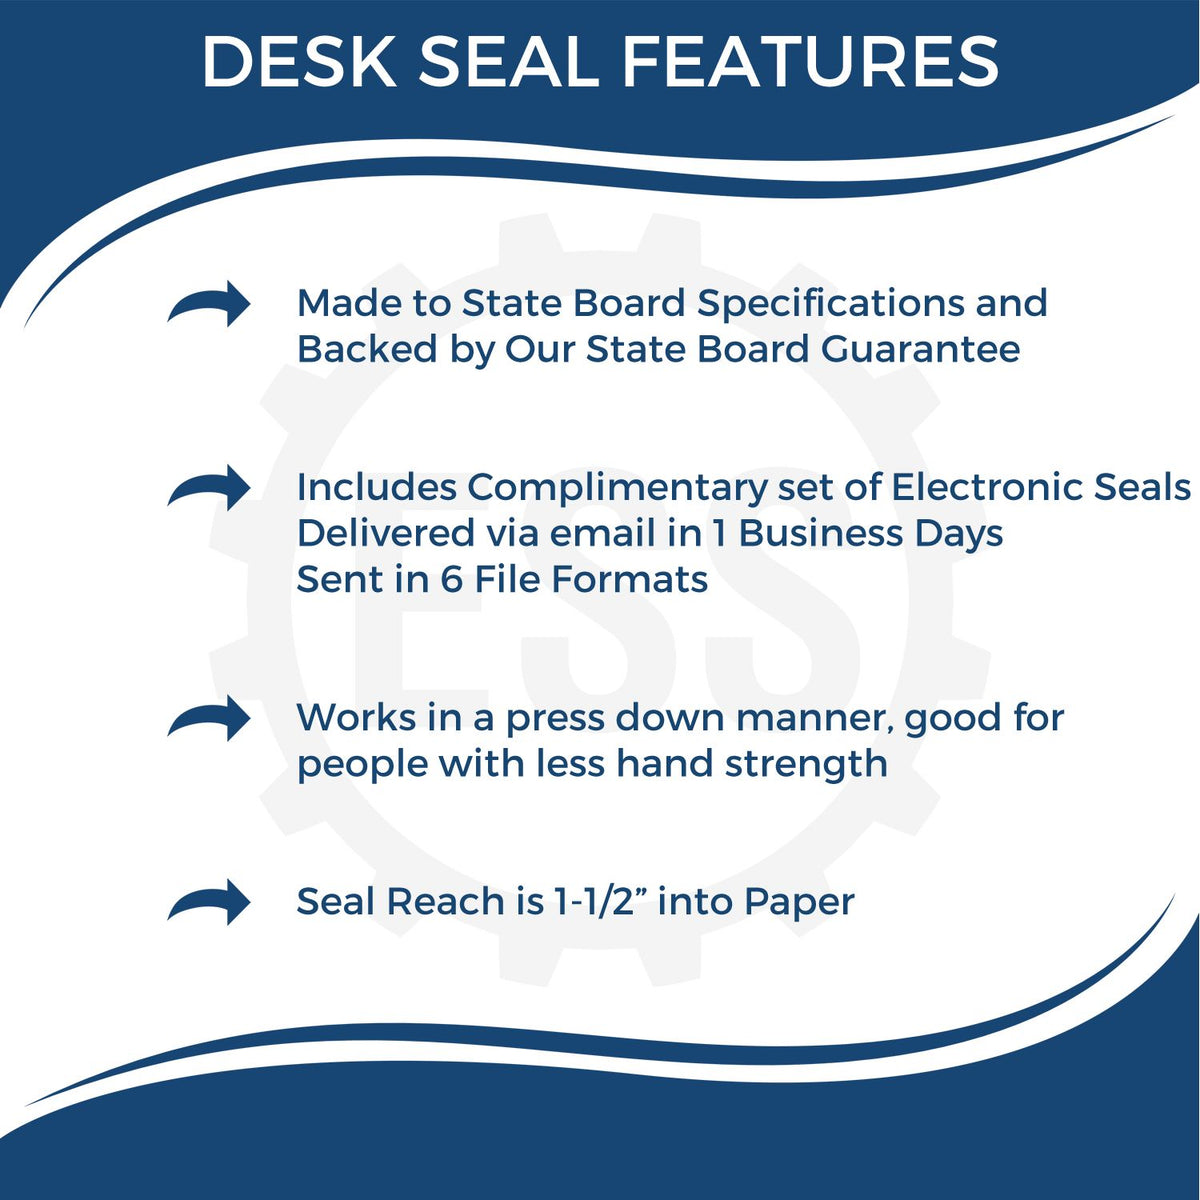 A picture of an infographic highlighting the selling points for the Colorado Desk Architect Embossing Seal